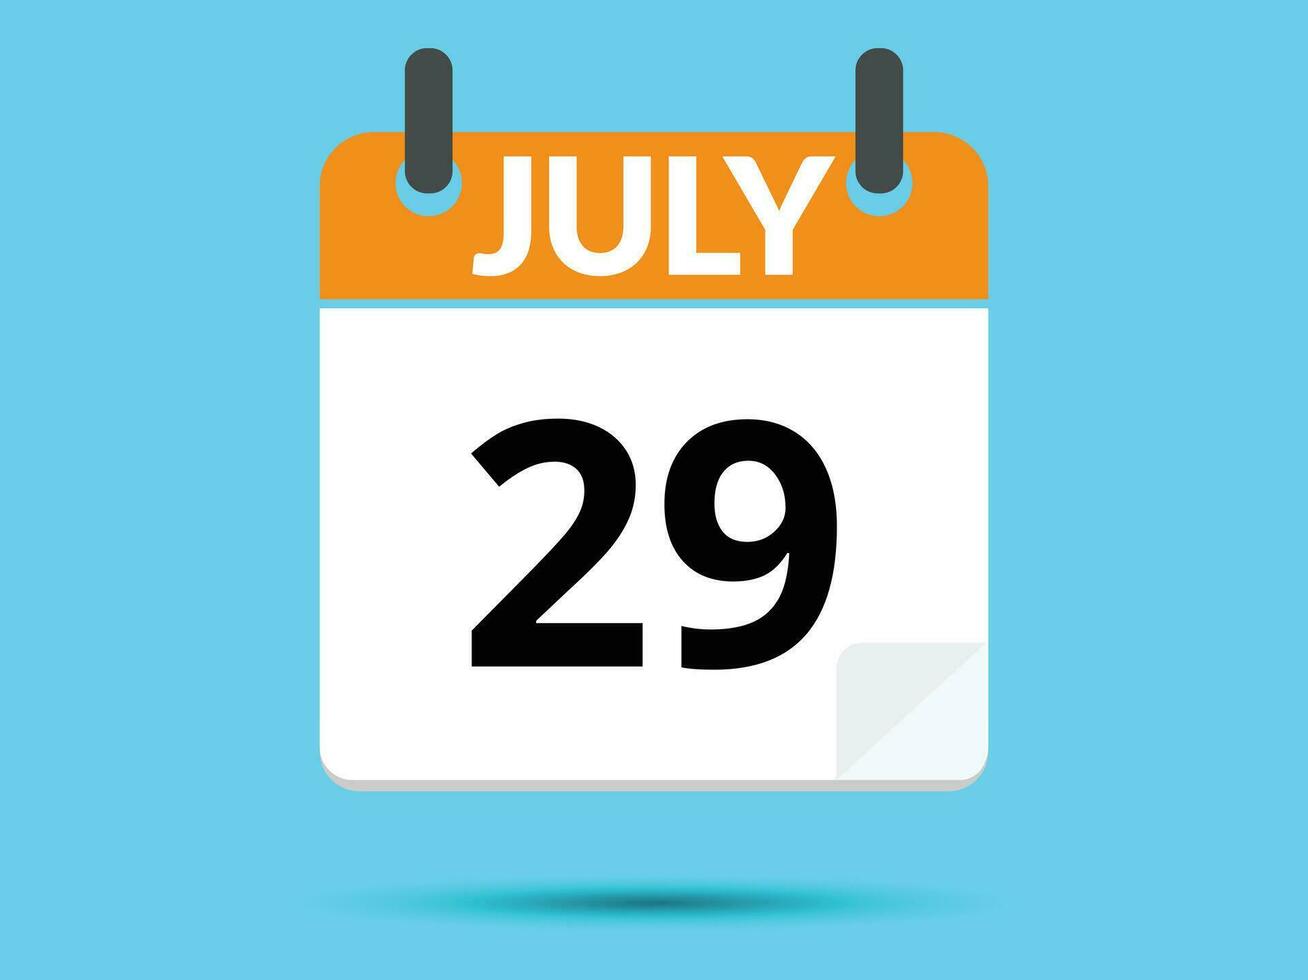 29 July. Flat icon calendar isolated on blue background. Vector illustration.